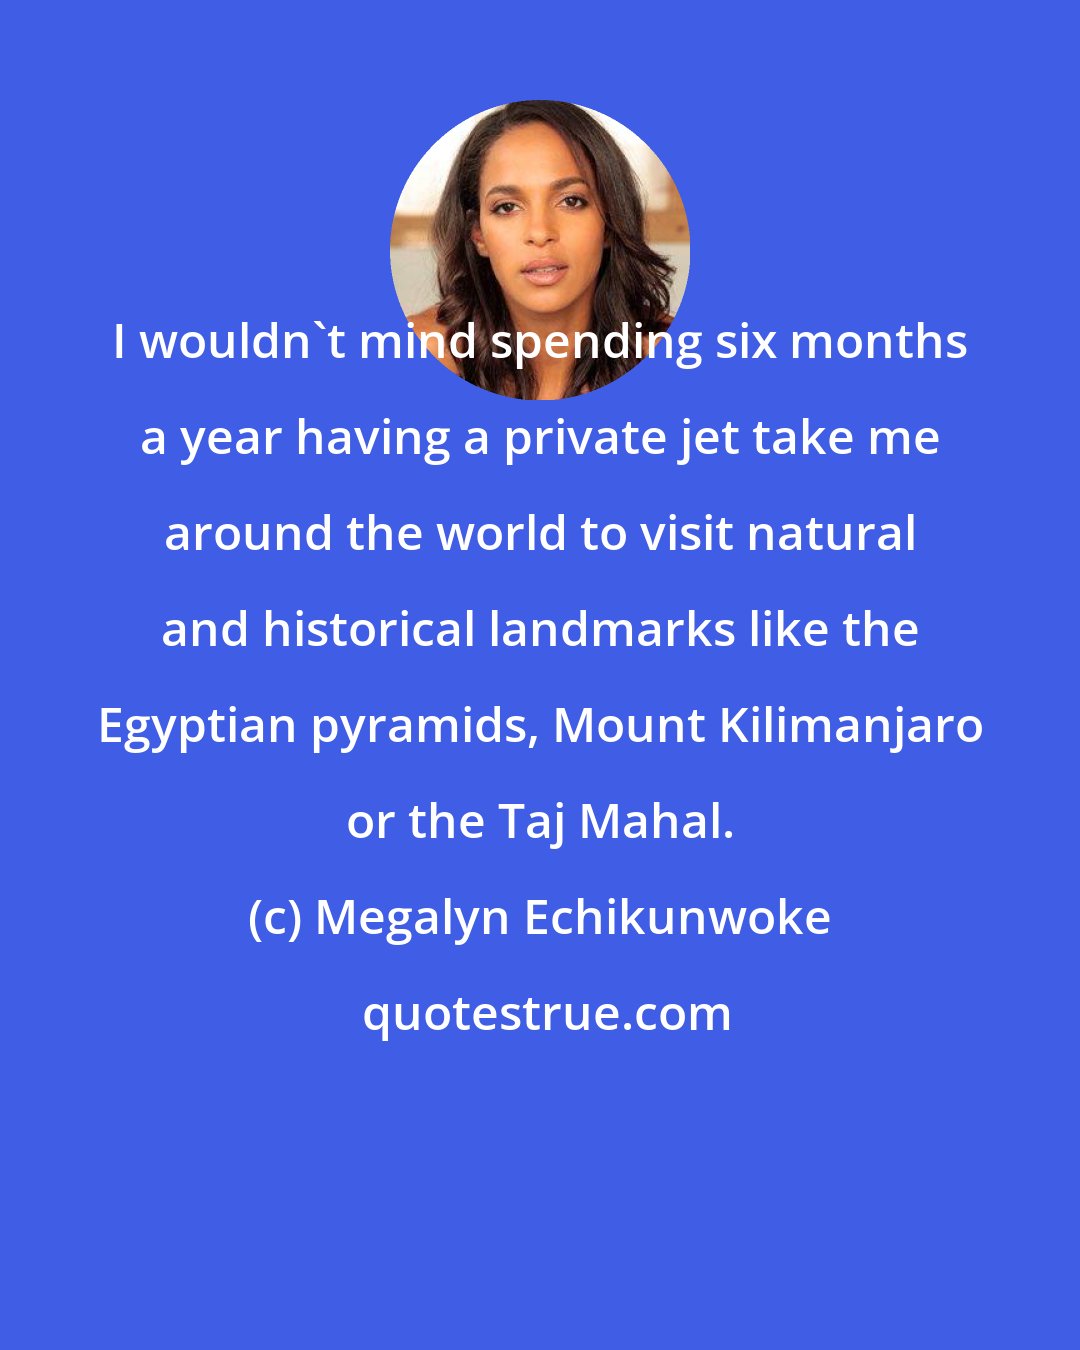 Megalyn Echikunwoke: I wouldn't mind spending six months a year having a private jet take me around the world to visit natural and historical landmarks like the Egyptian pyramids, Mount Kilimanjaro or the Taj Mahal.